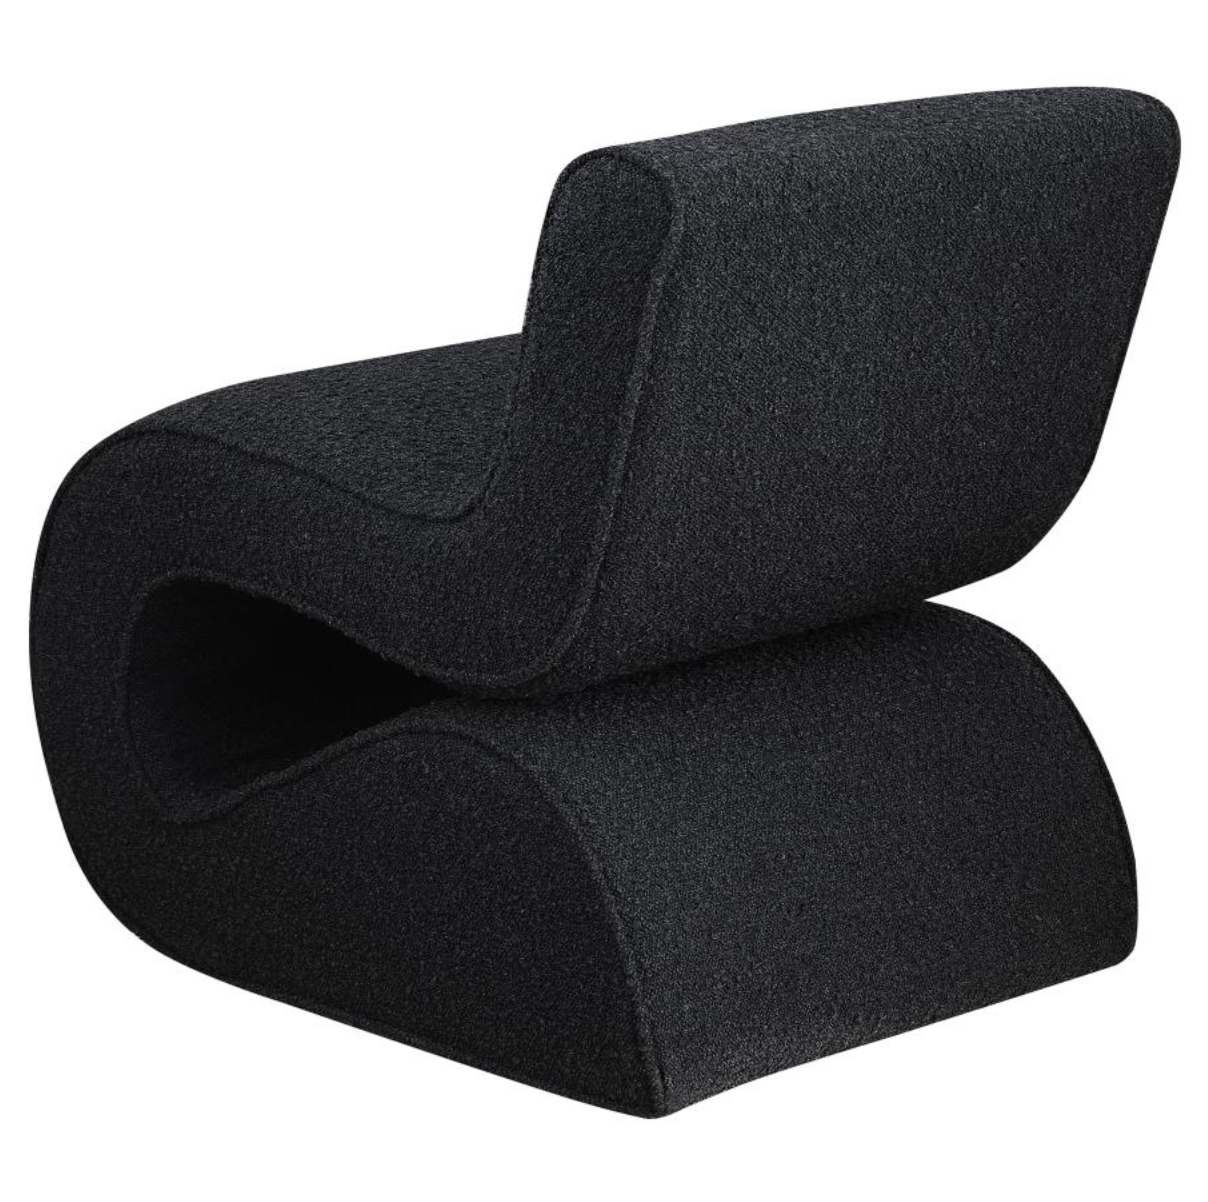 RONEA Boucle Upholstered Armless Curved Accent Chair